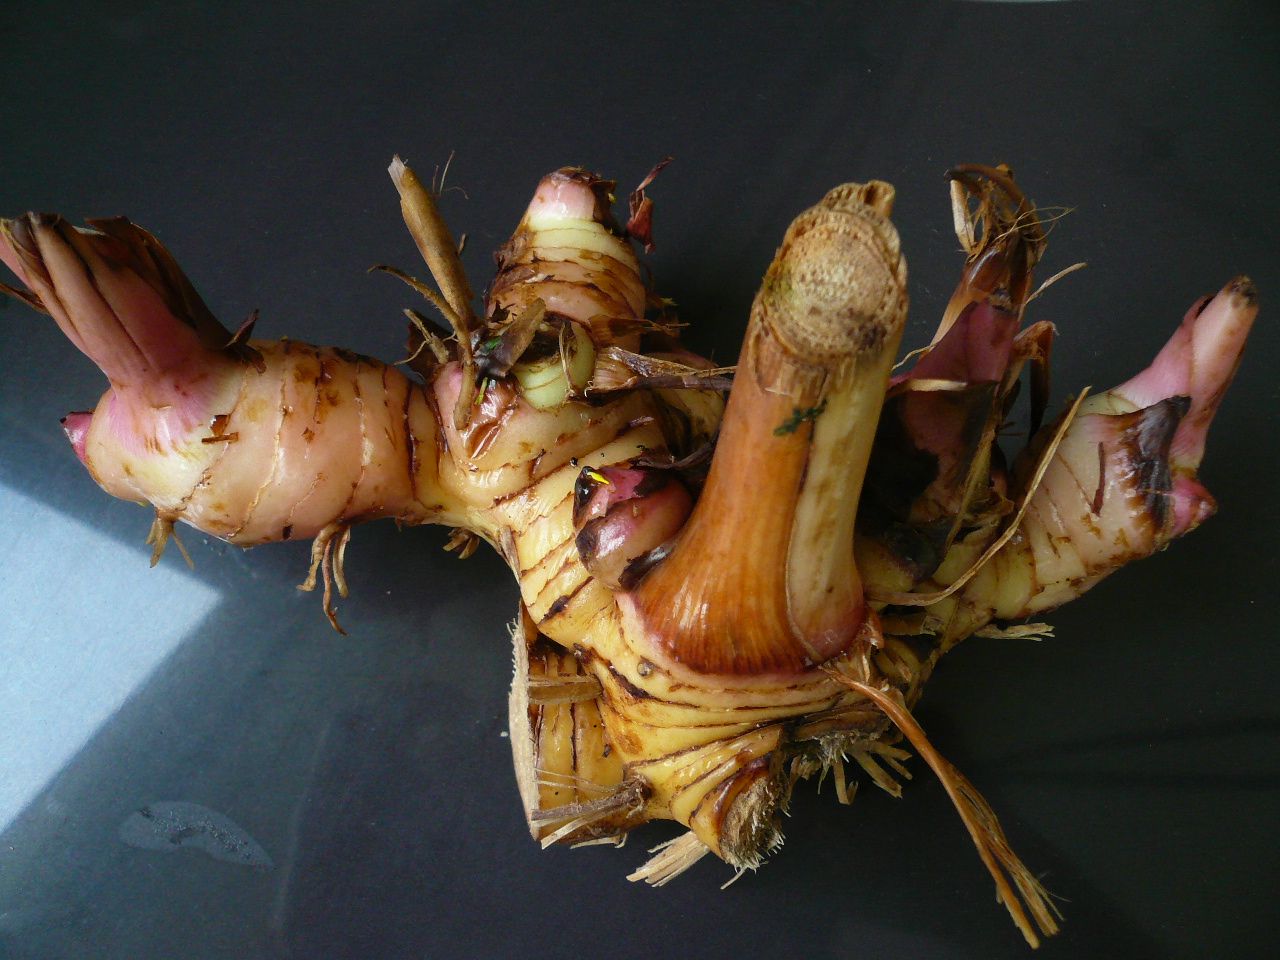 These rhizomes are a common ingredient in Thai soups and curries. 